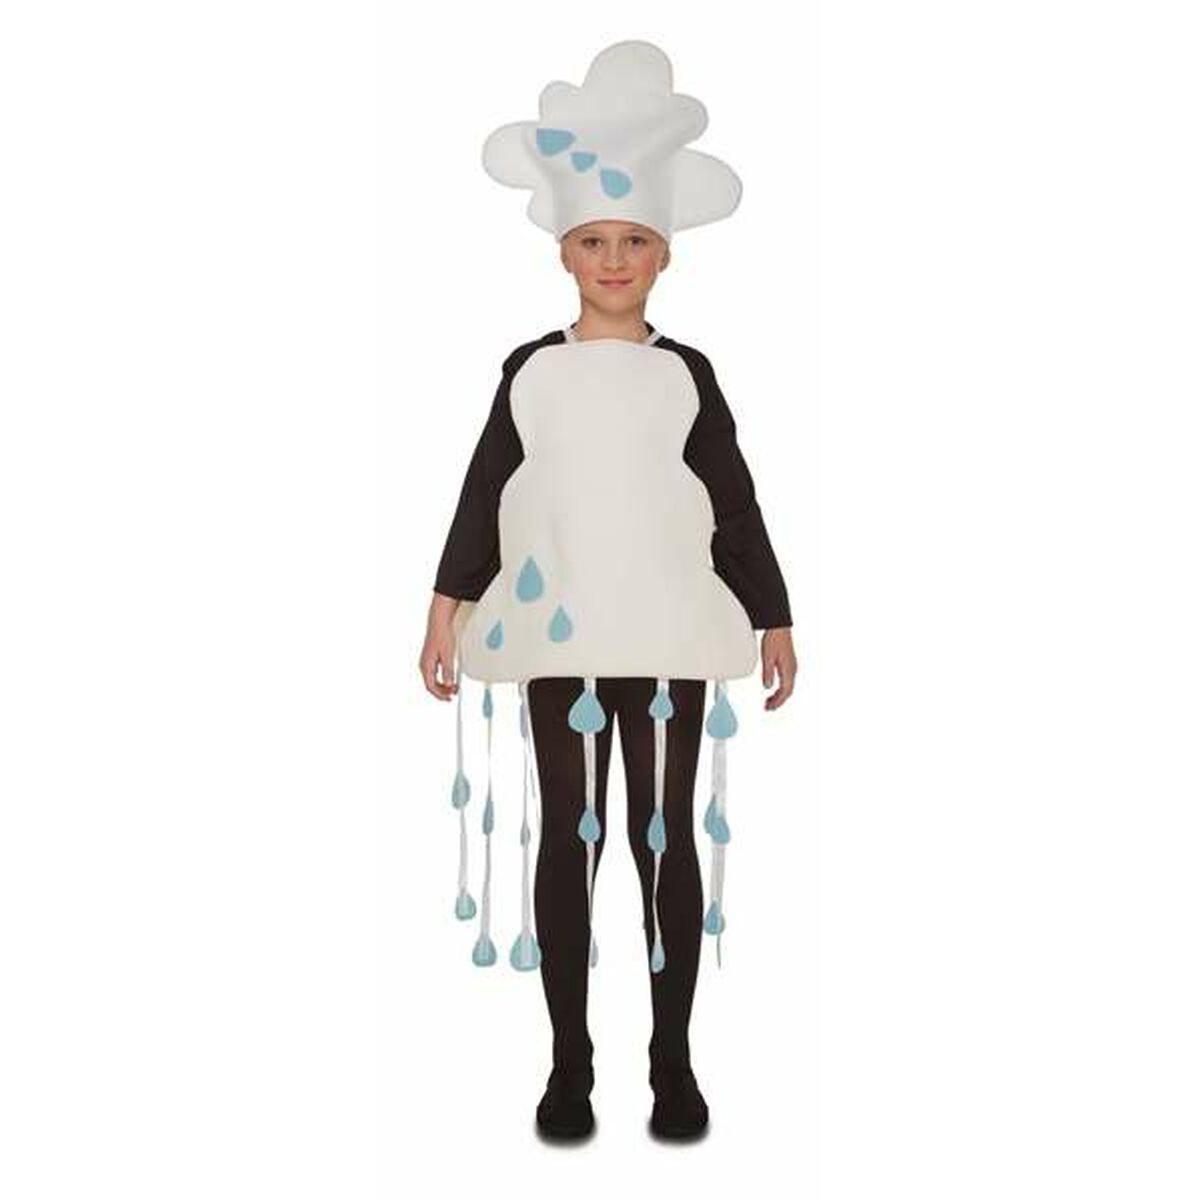 Costume for Children My Other Me Small Storm